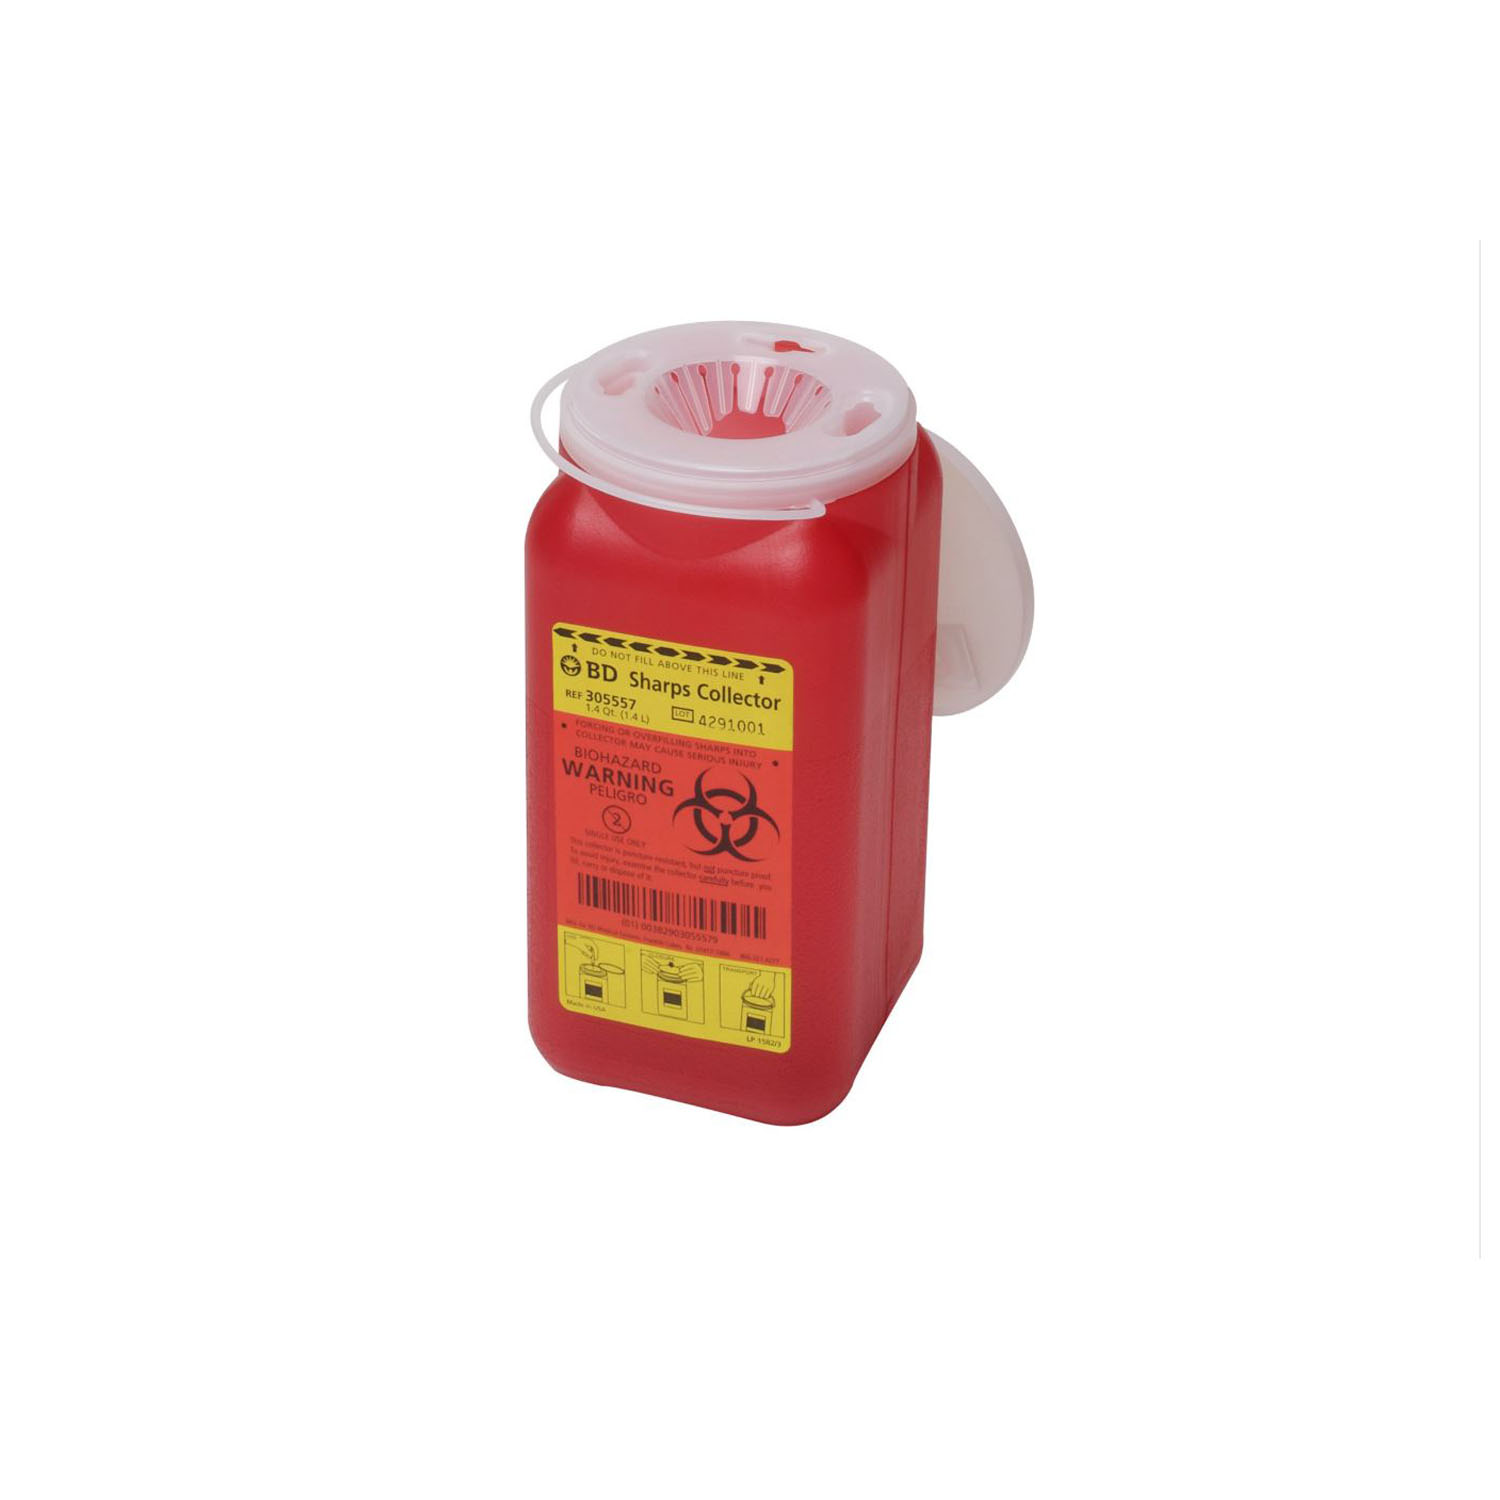 BD MULTI-USE ONE-PIECE SHARPS COLLECTORS : 305557 CS $179.45 Stocked